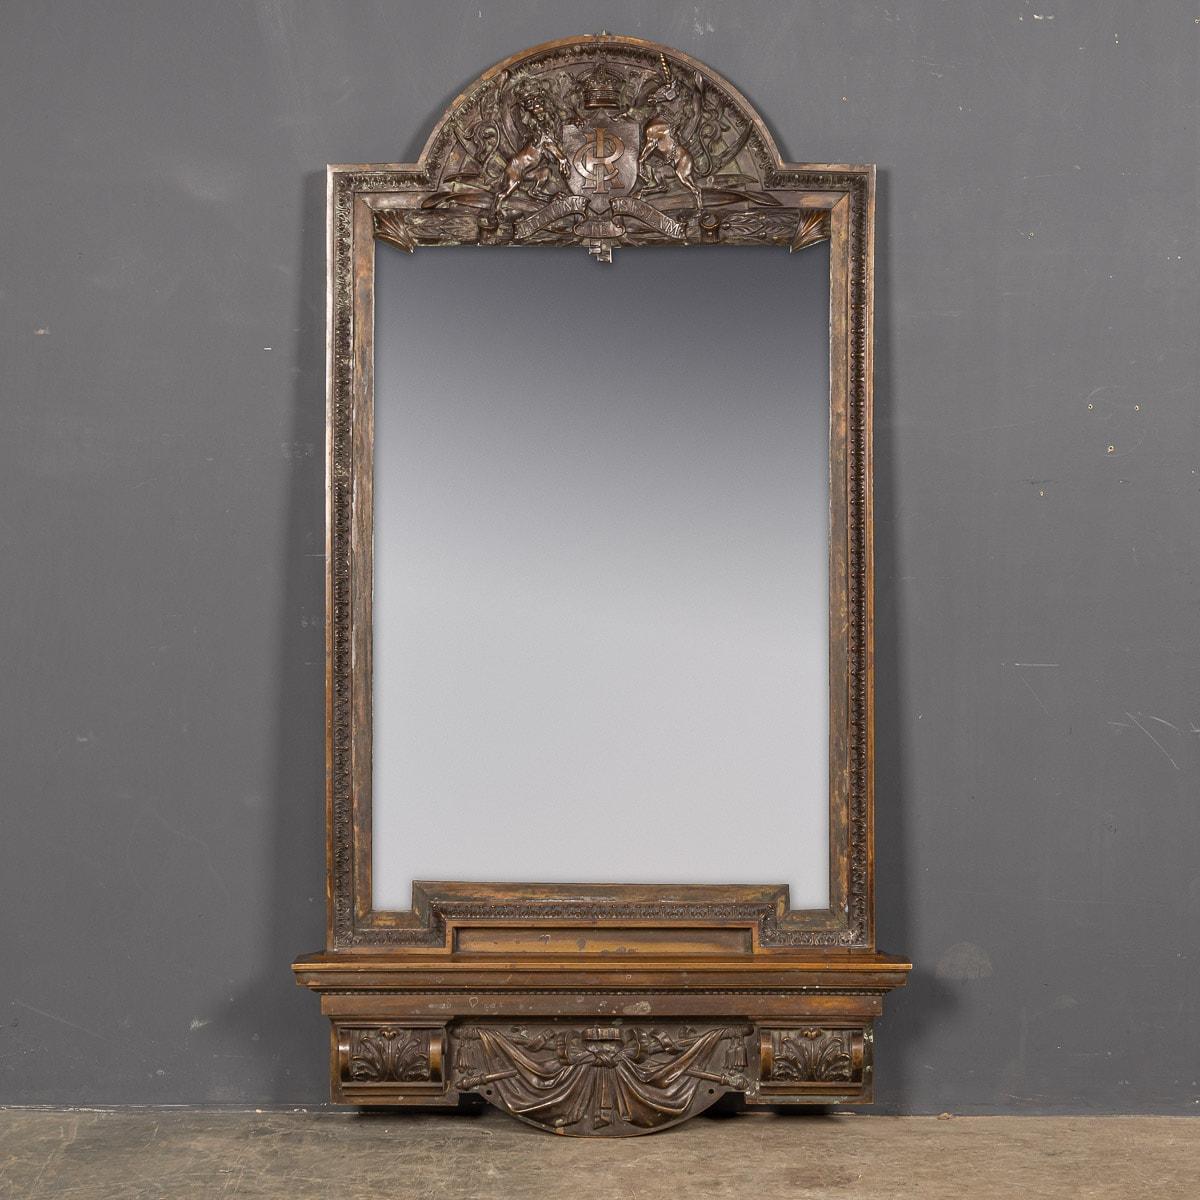 Antique late-19th Century large bronze framed mirror with a cast monogramed crest entwining the initials R C I of the Royal Insurance Company above the motto “Tutum Te Sistam” meaning “I will keep you safe”. This beautiful Victorian mirror would